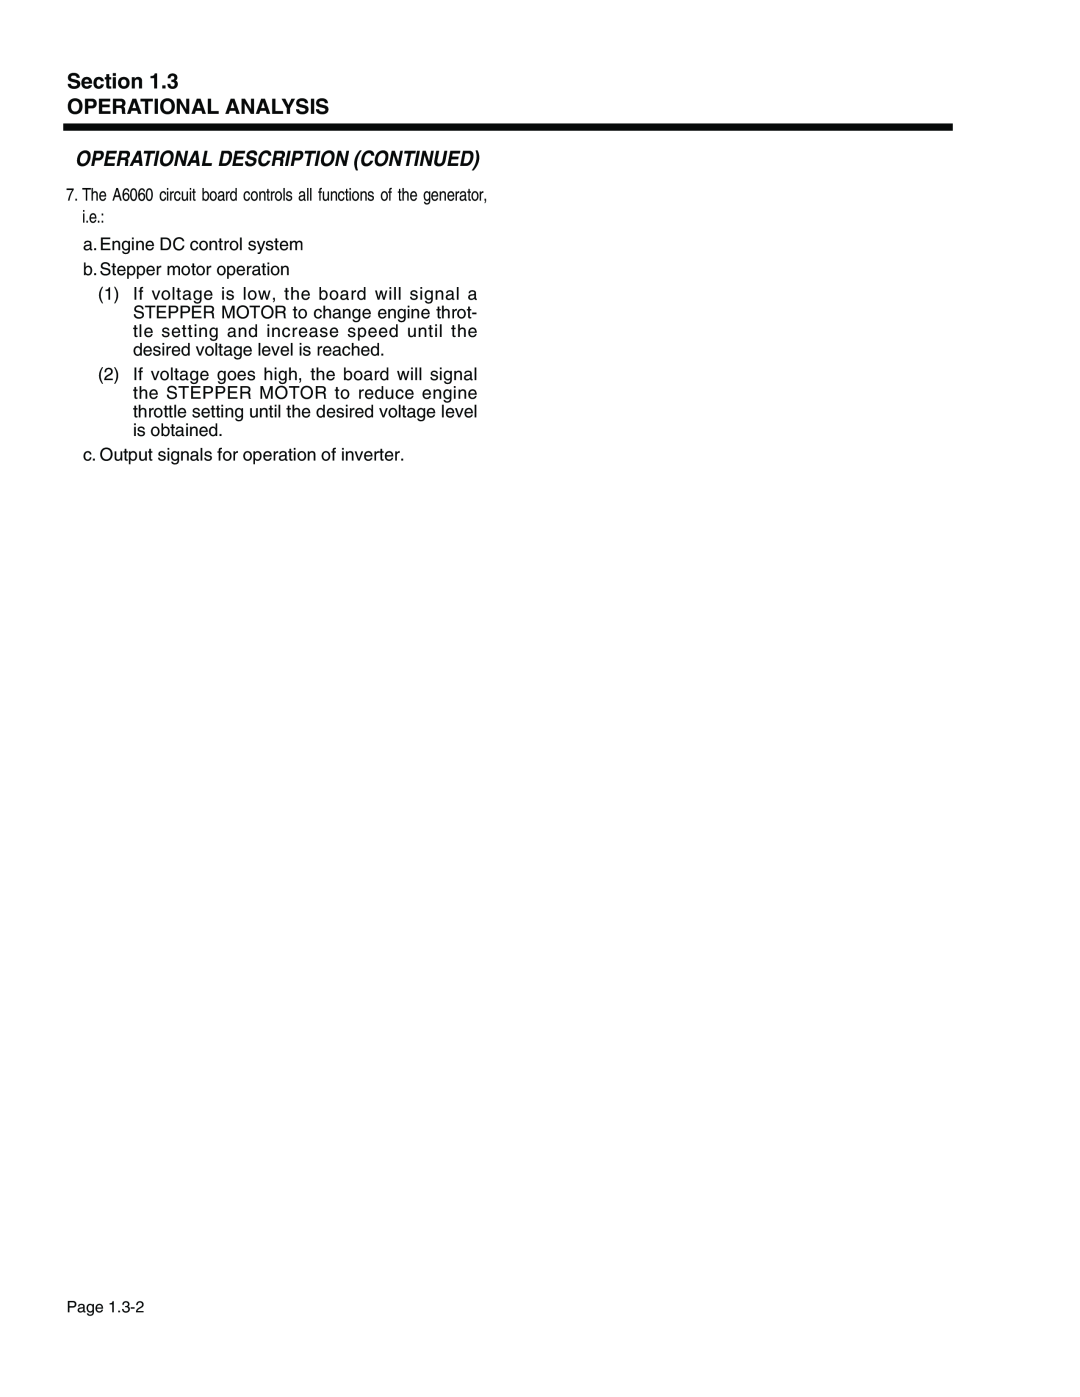 Generac Power Systems 940-2, 941-2 service manual Operational Description Continued, Section OPERATIONAL ANALYSIS 